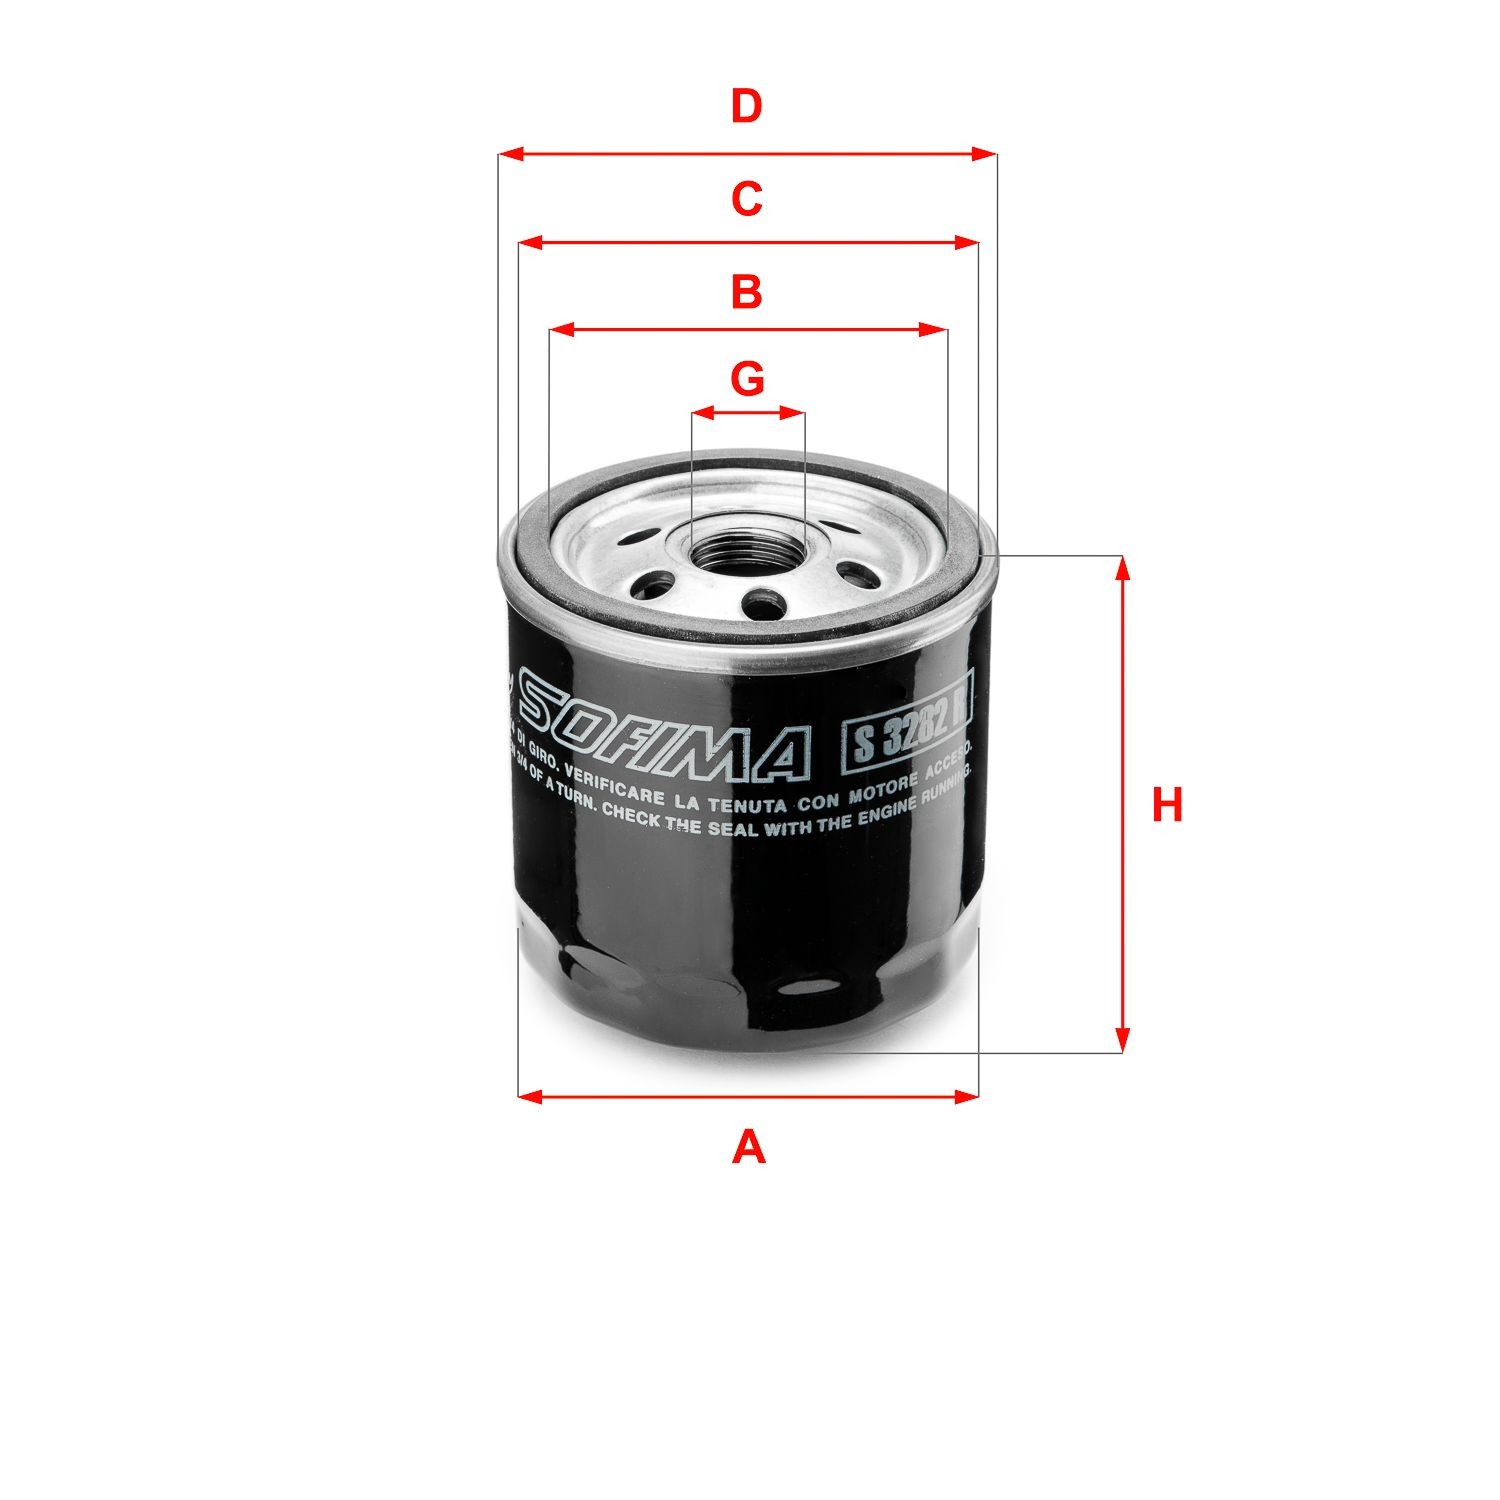 SOFIMA S 3282 R Oil filter 3/4-16 UNF, with one anti-return valve, Spin-on Filter